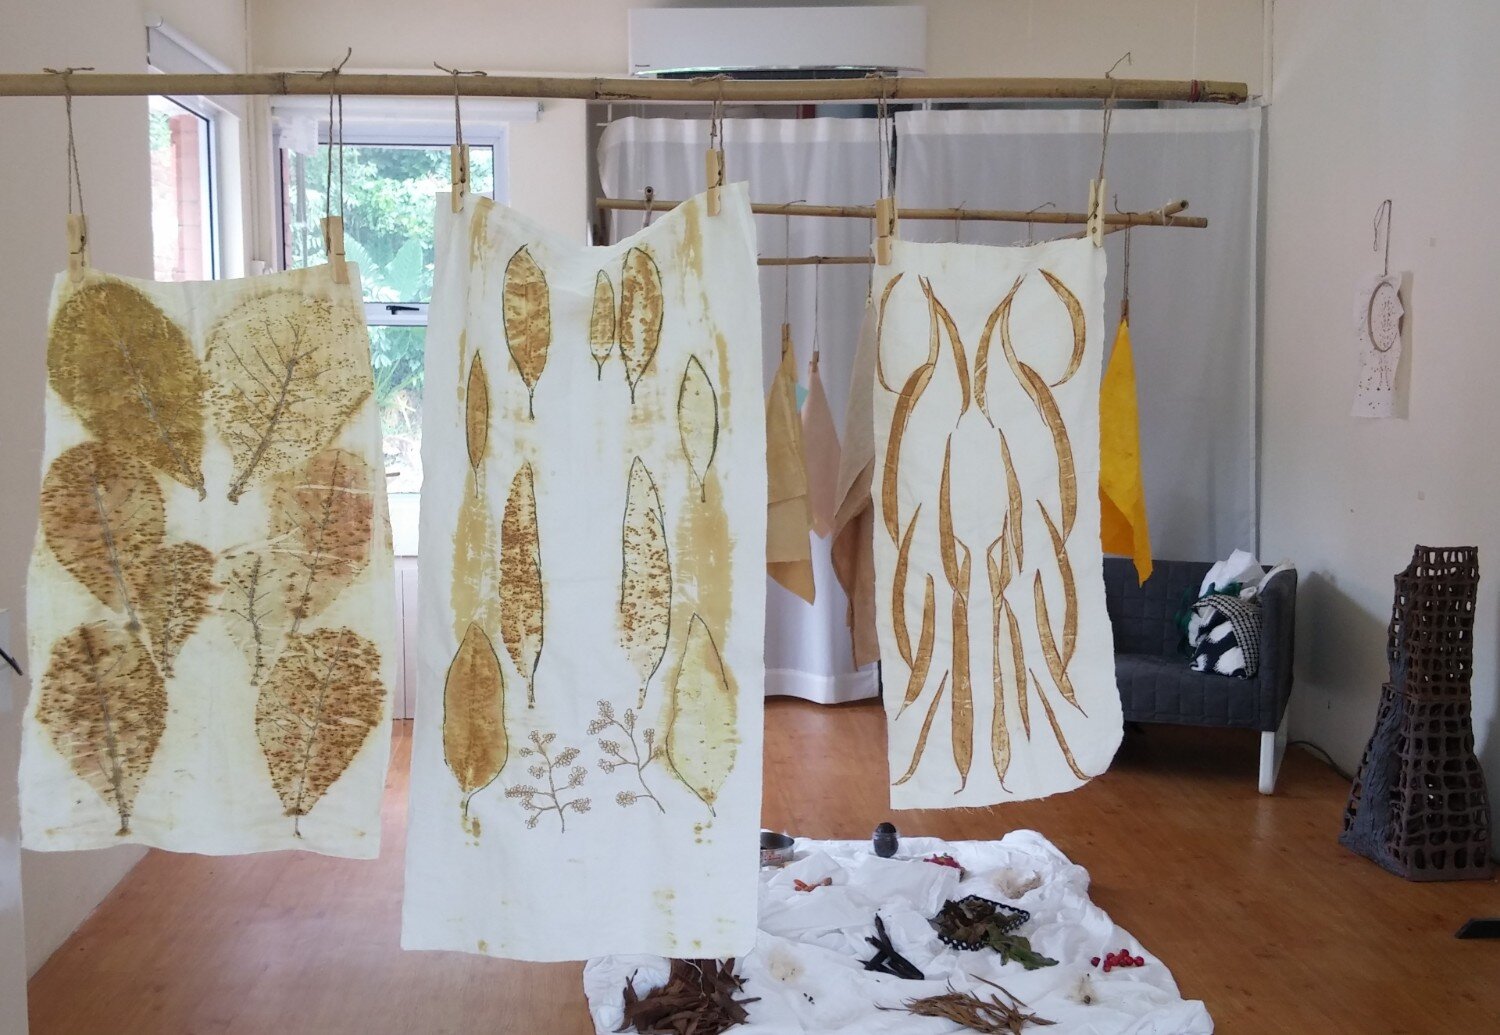 Natural dyes interactive installation by Agy Textile Artist at L'Observatoire